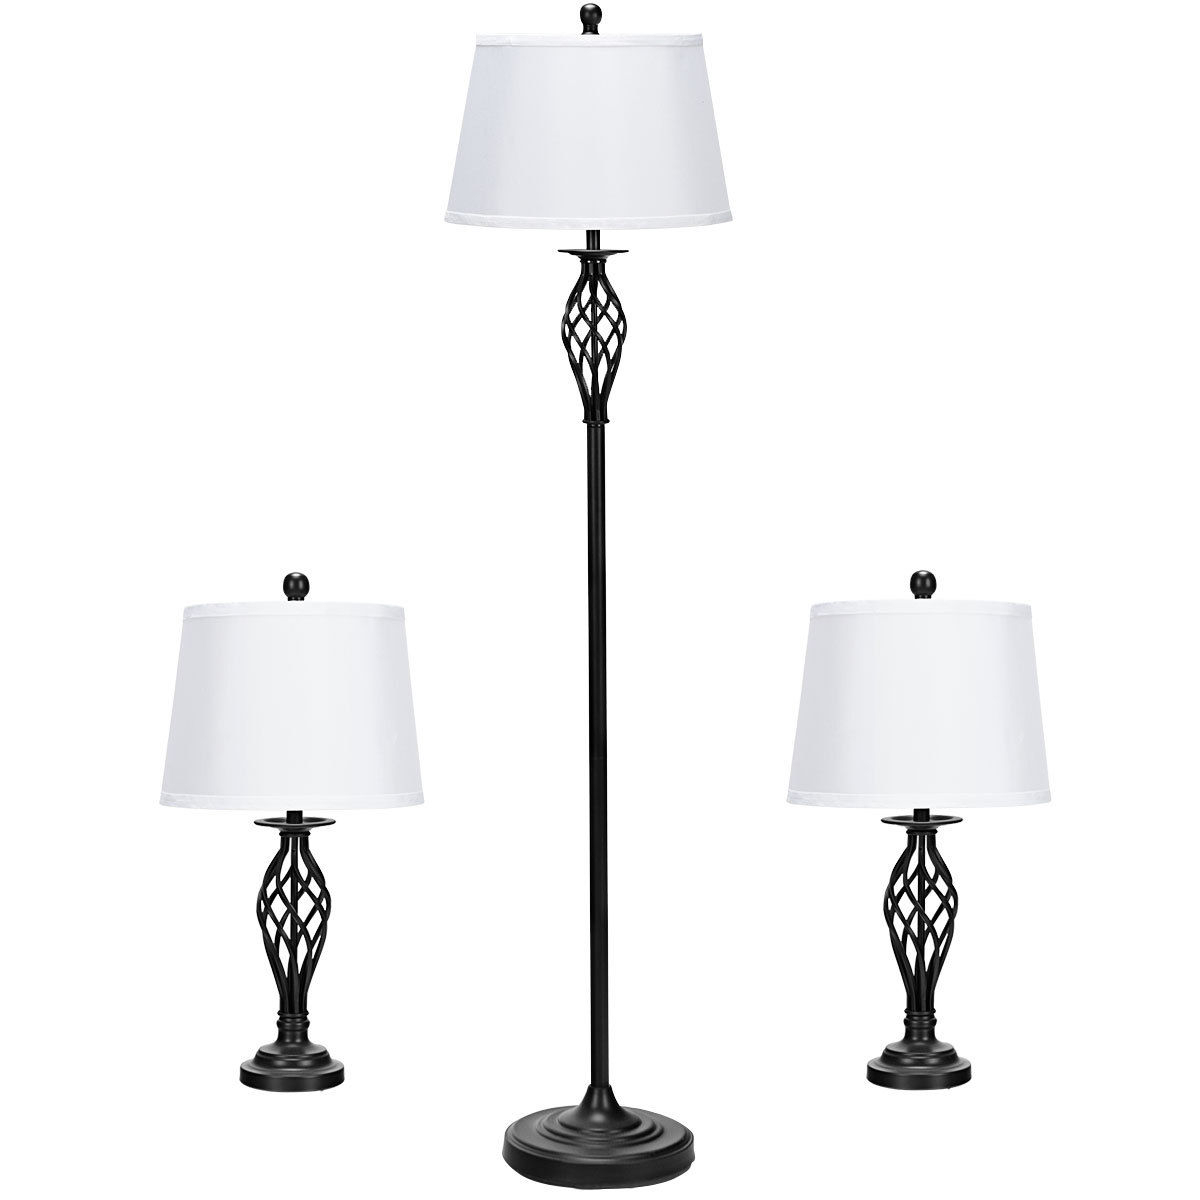 3-Piece Lamp Set 2 Table Lamps 1 Floor Lamp Fabric Shades Living Room Bedroom